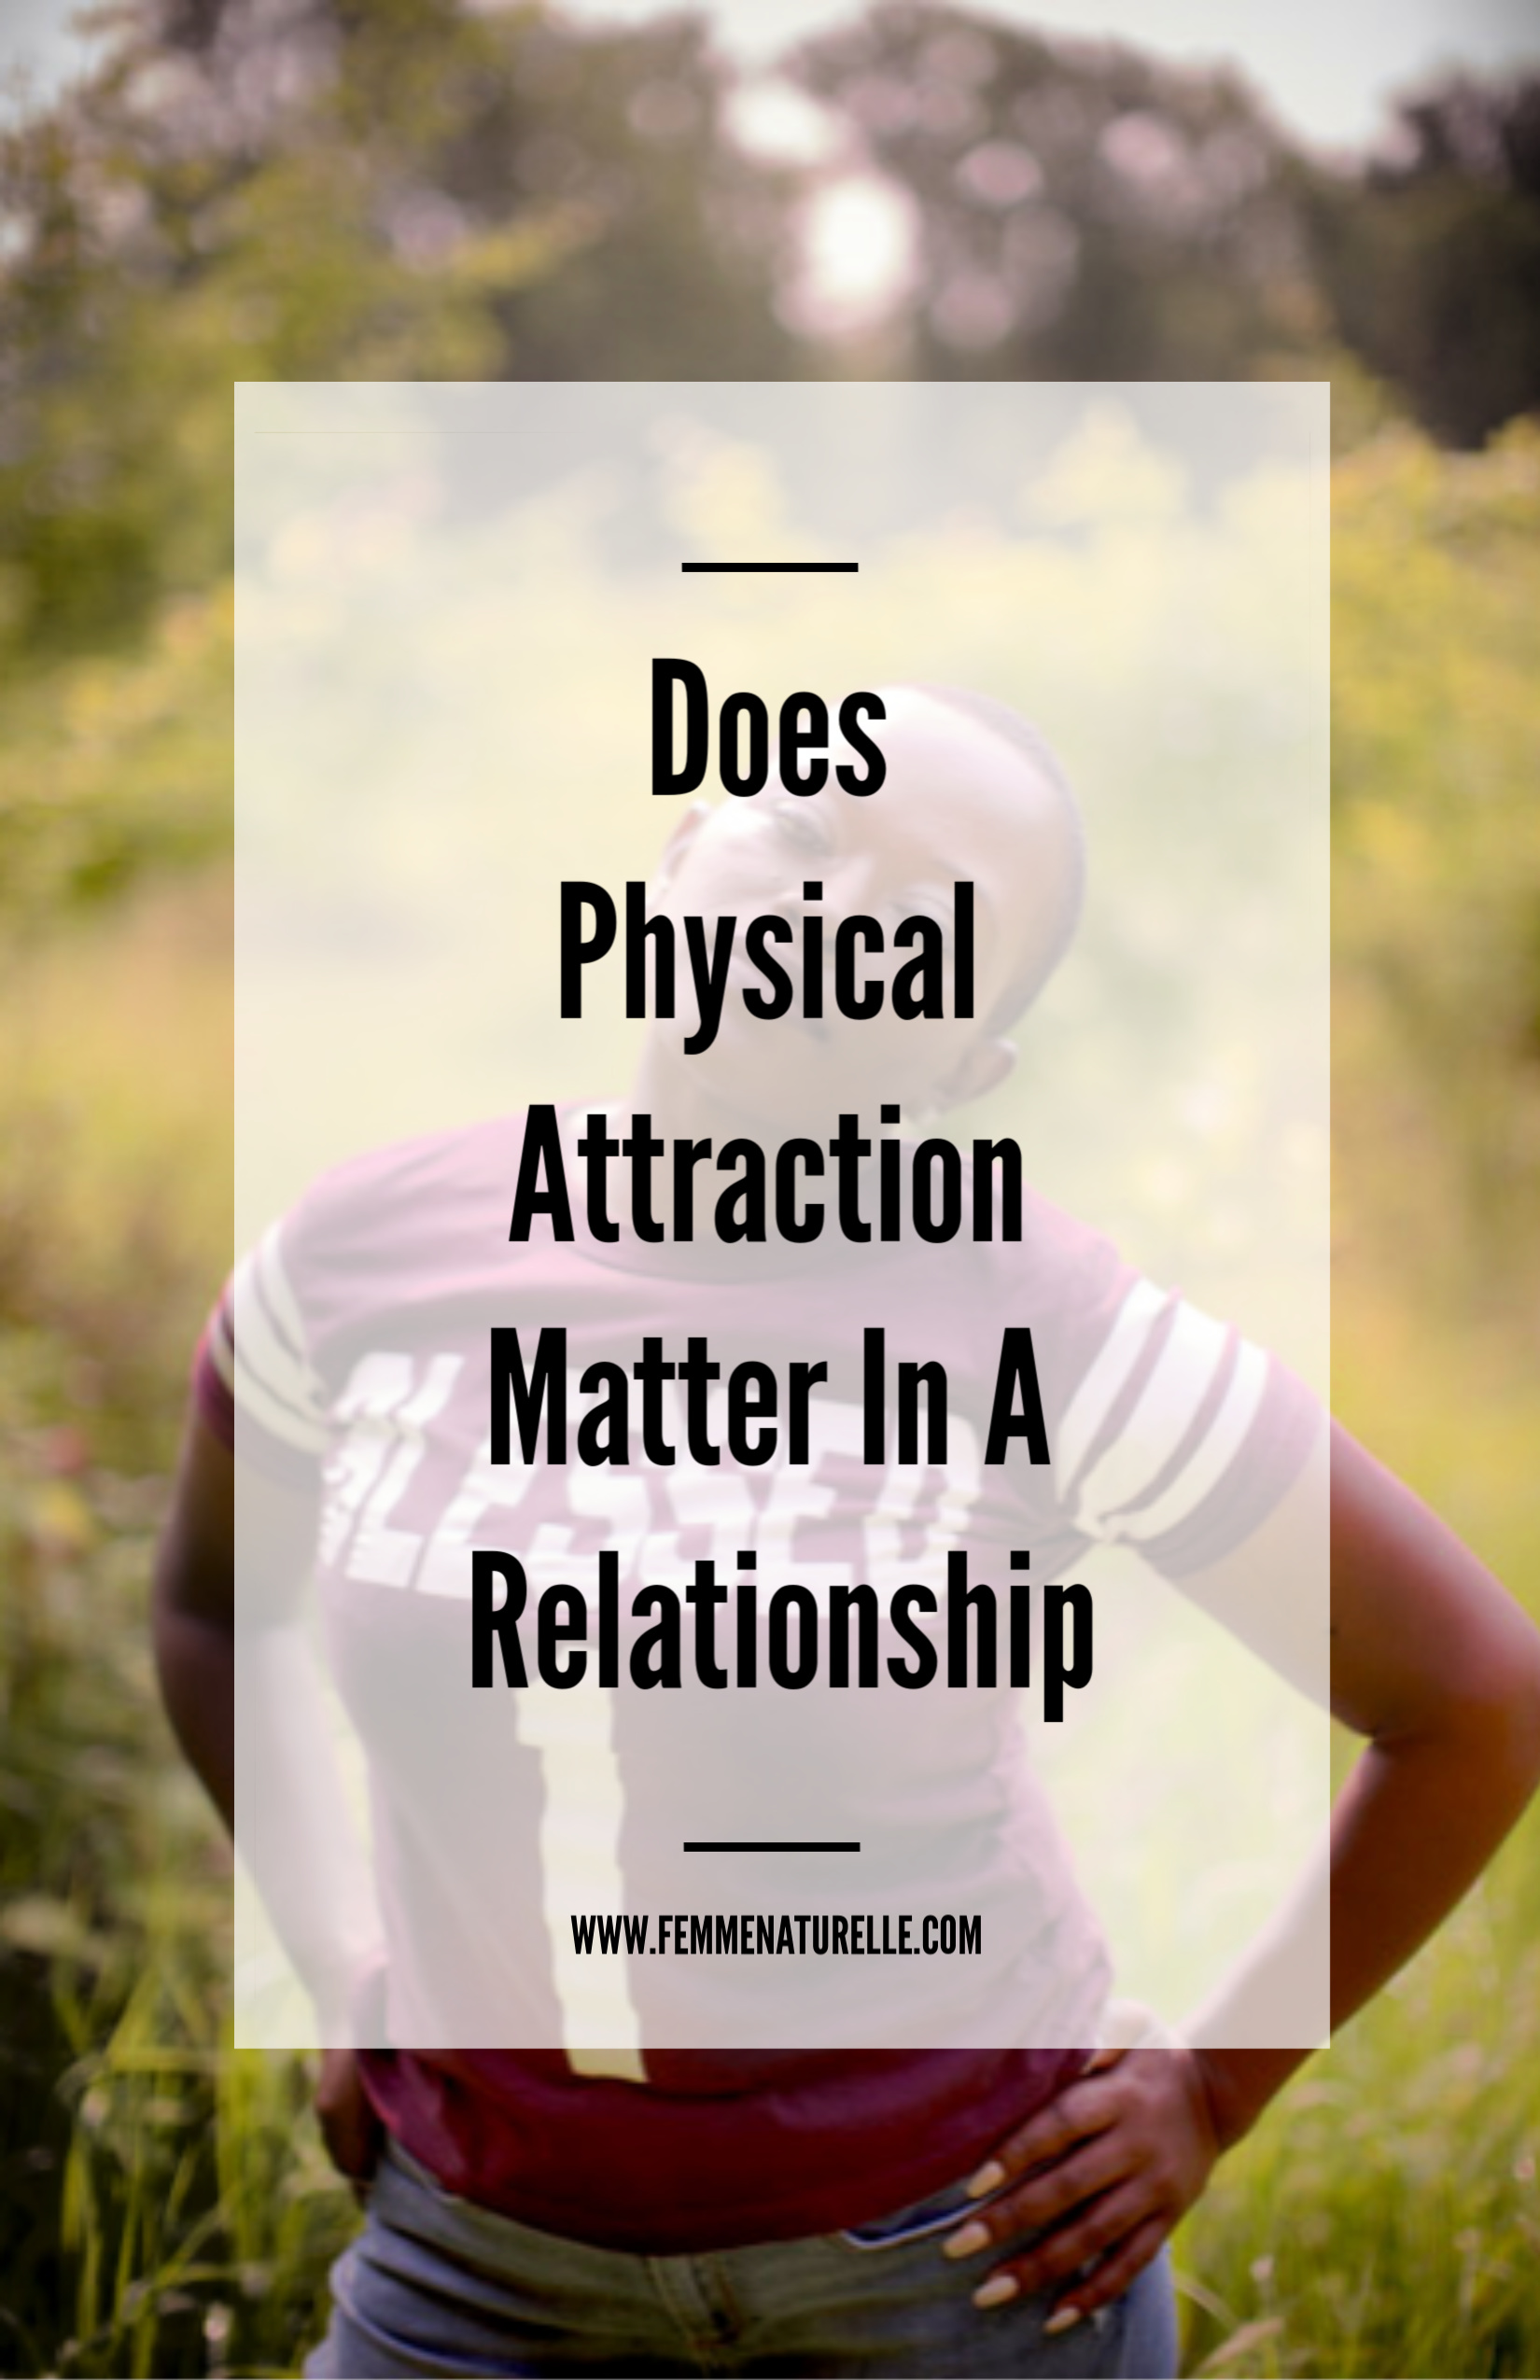 Does Physical Attraction Matter In A Relationship